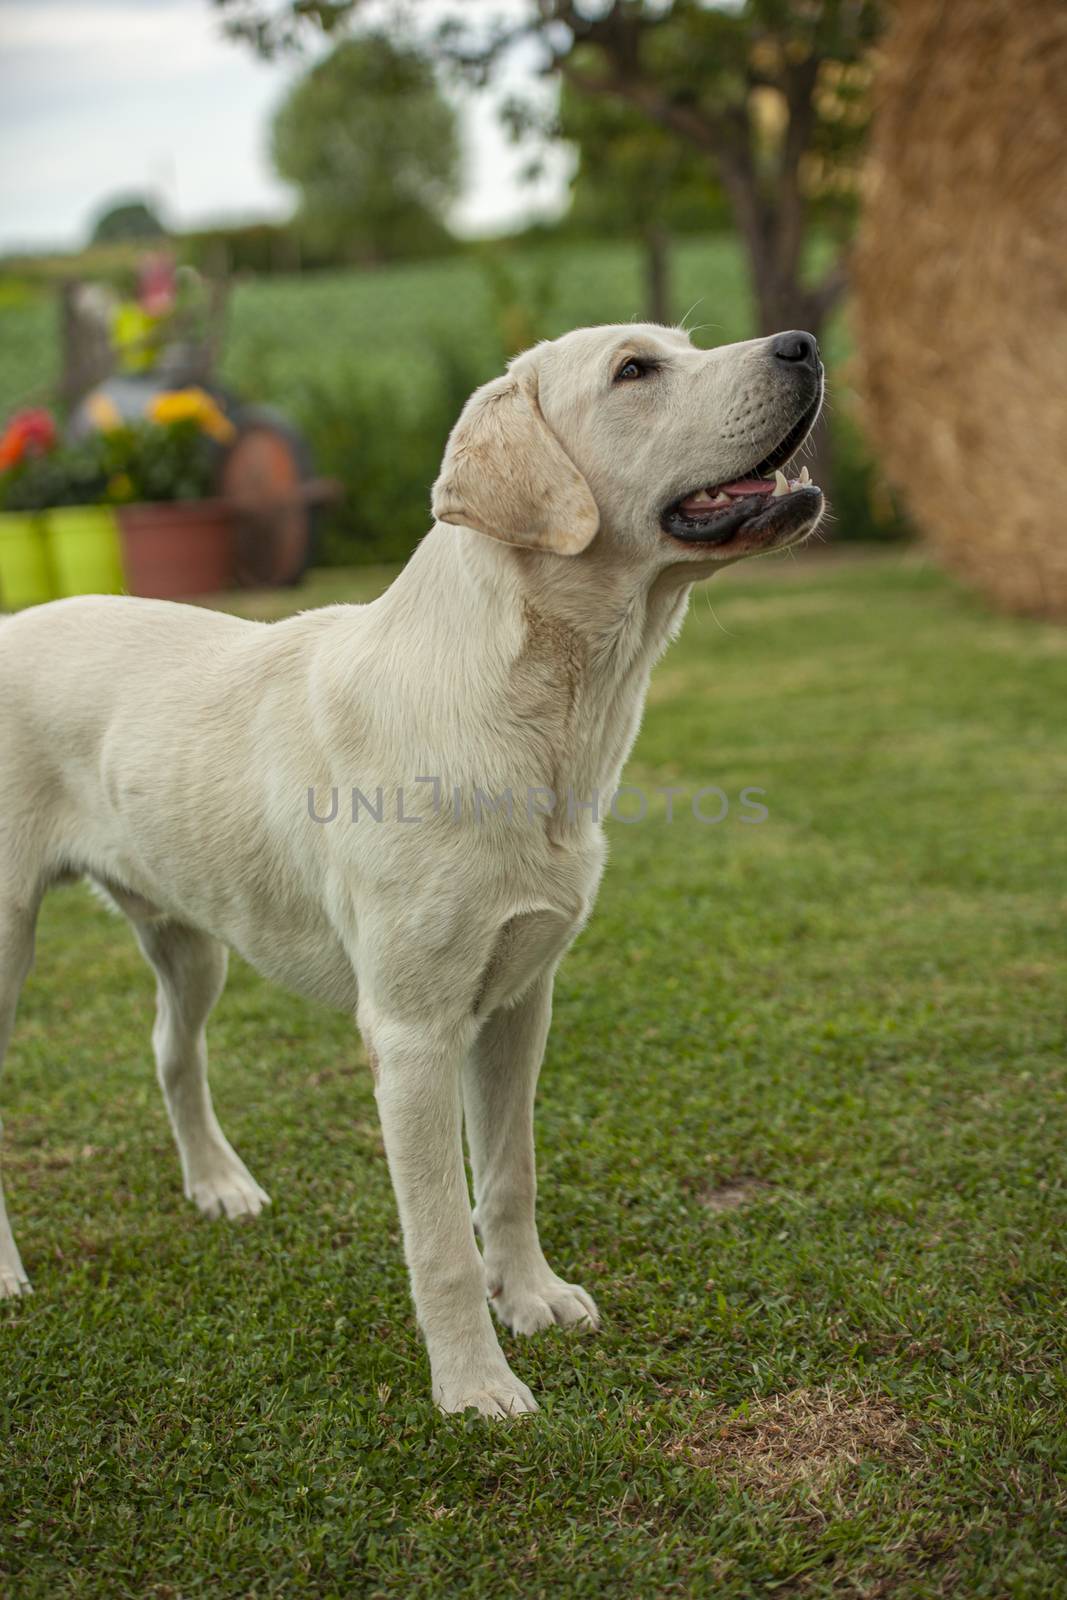 Labrador dog close up Portrait with a countryside backdrop